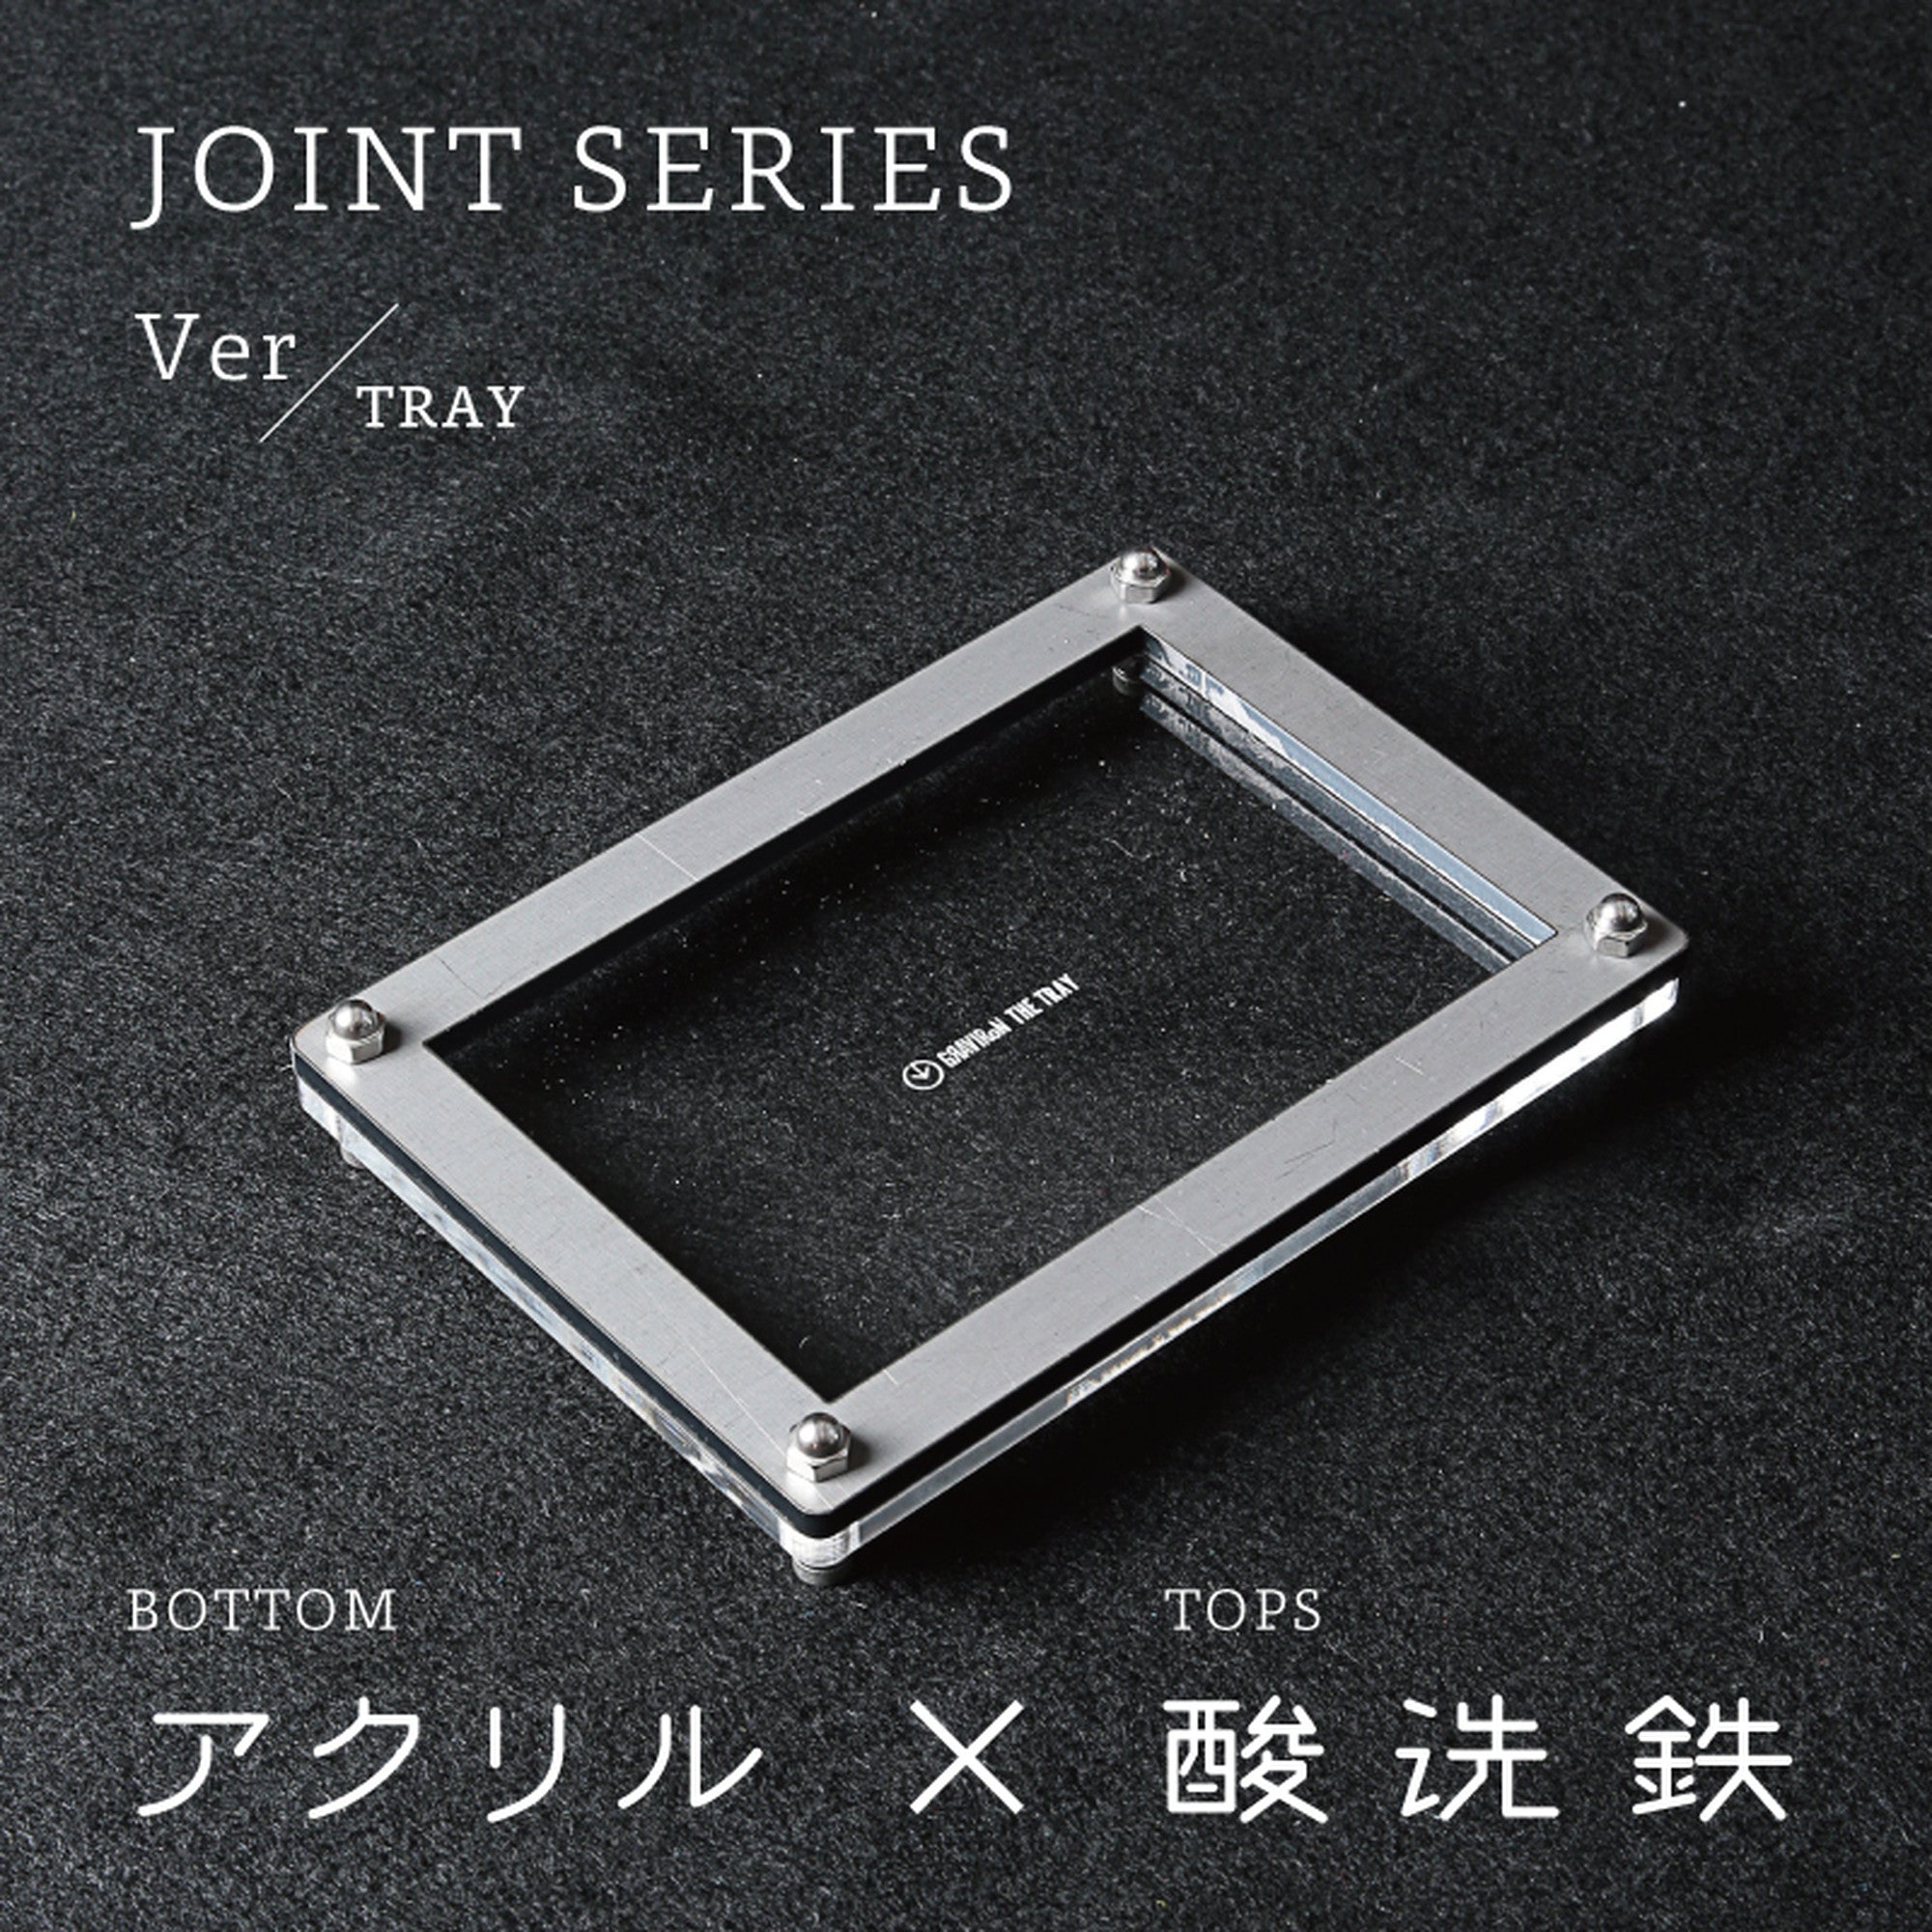 Joint Series Tray　BOTTOM：アクリル　TOP：酸洗鉄